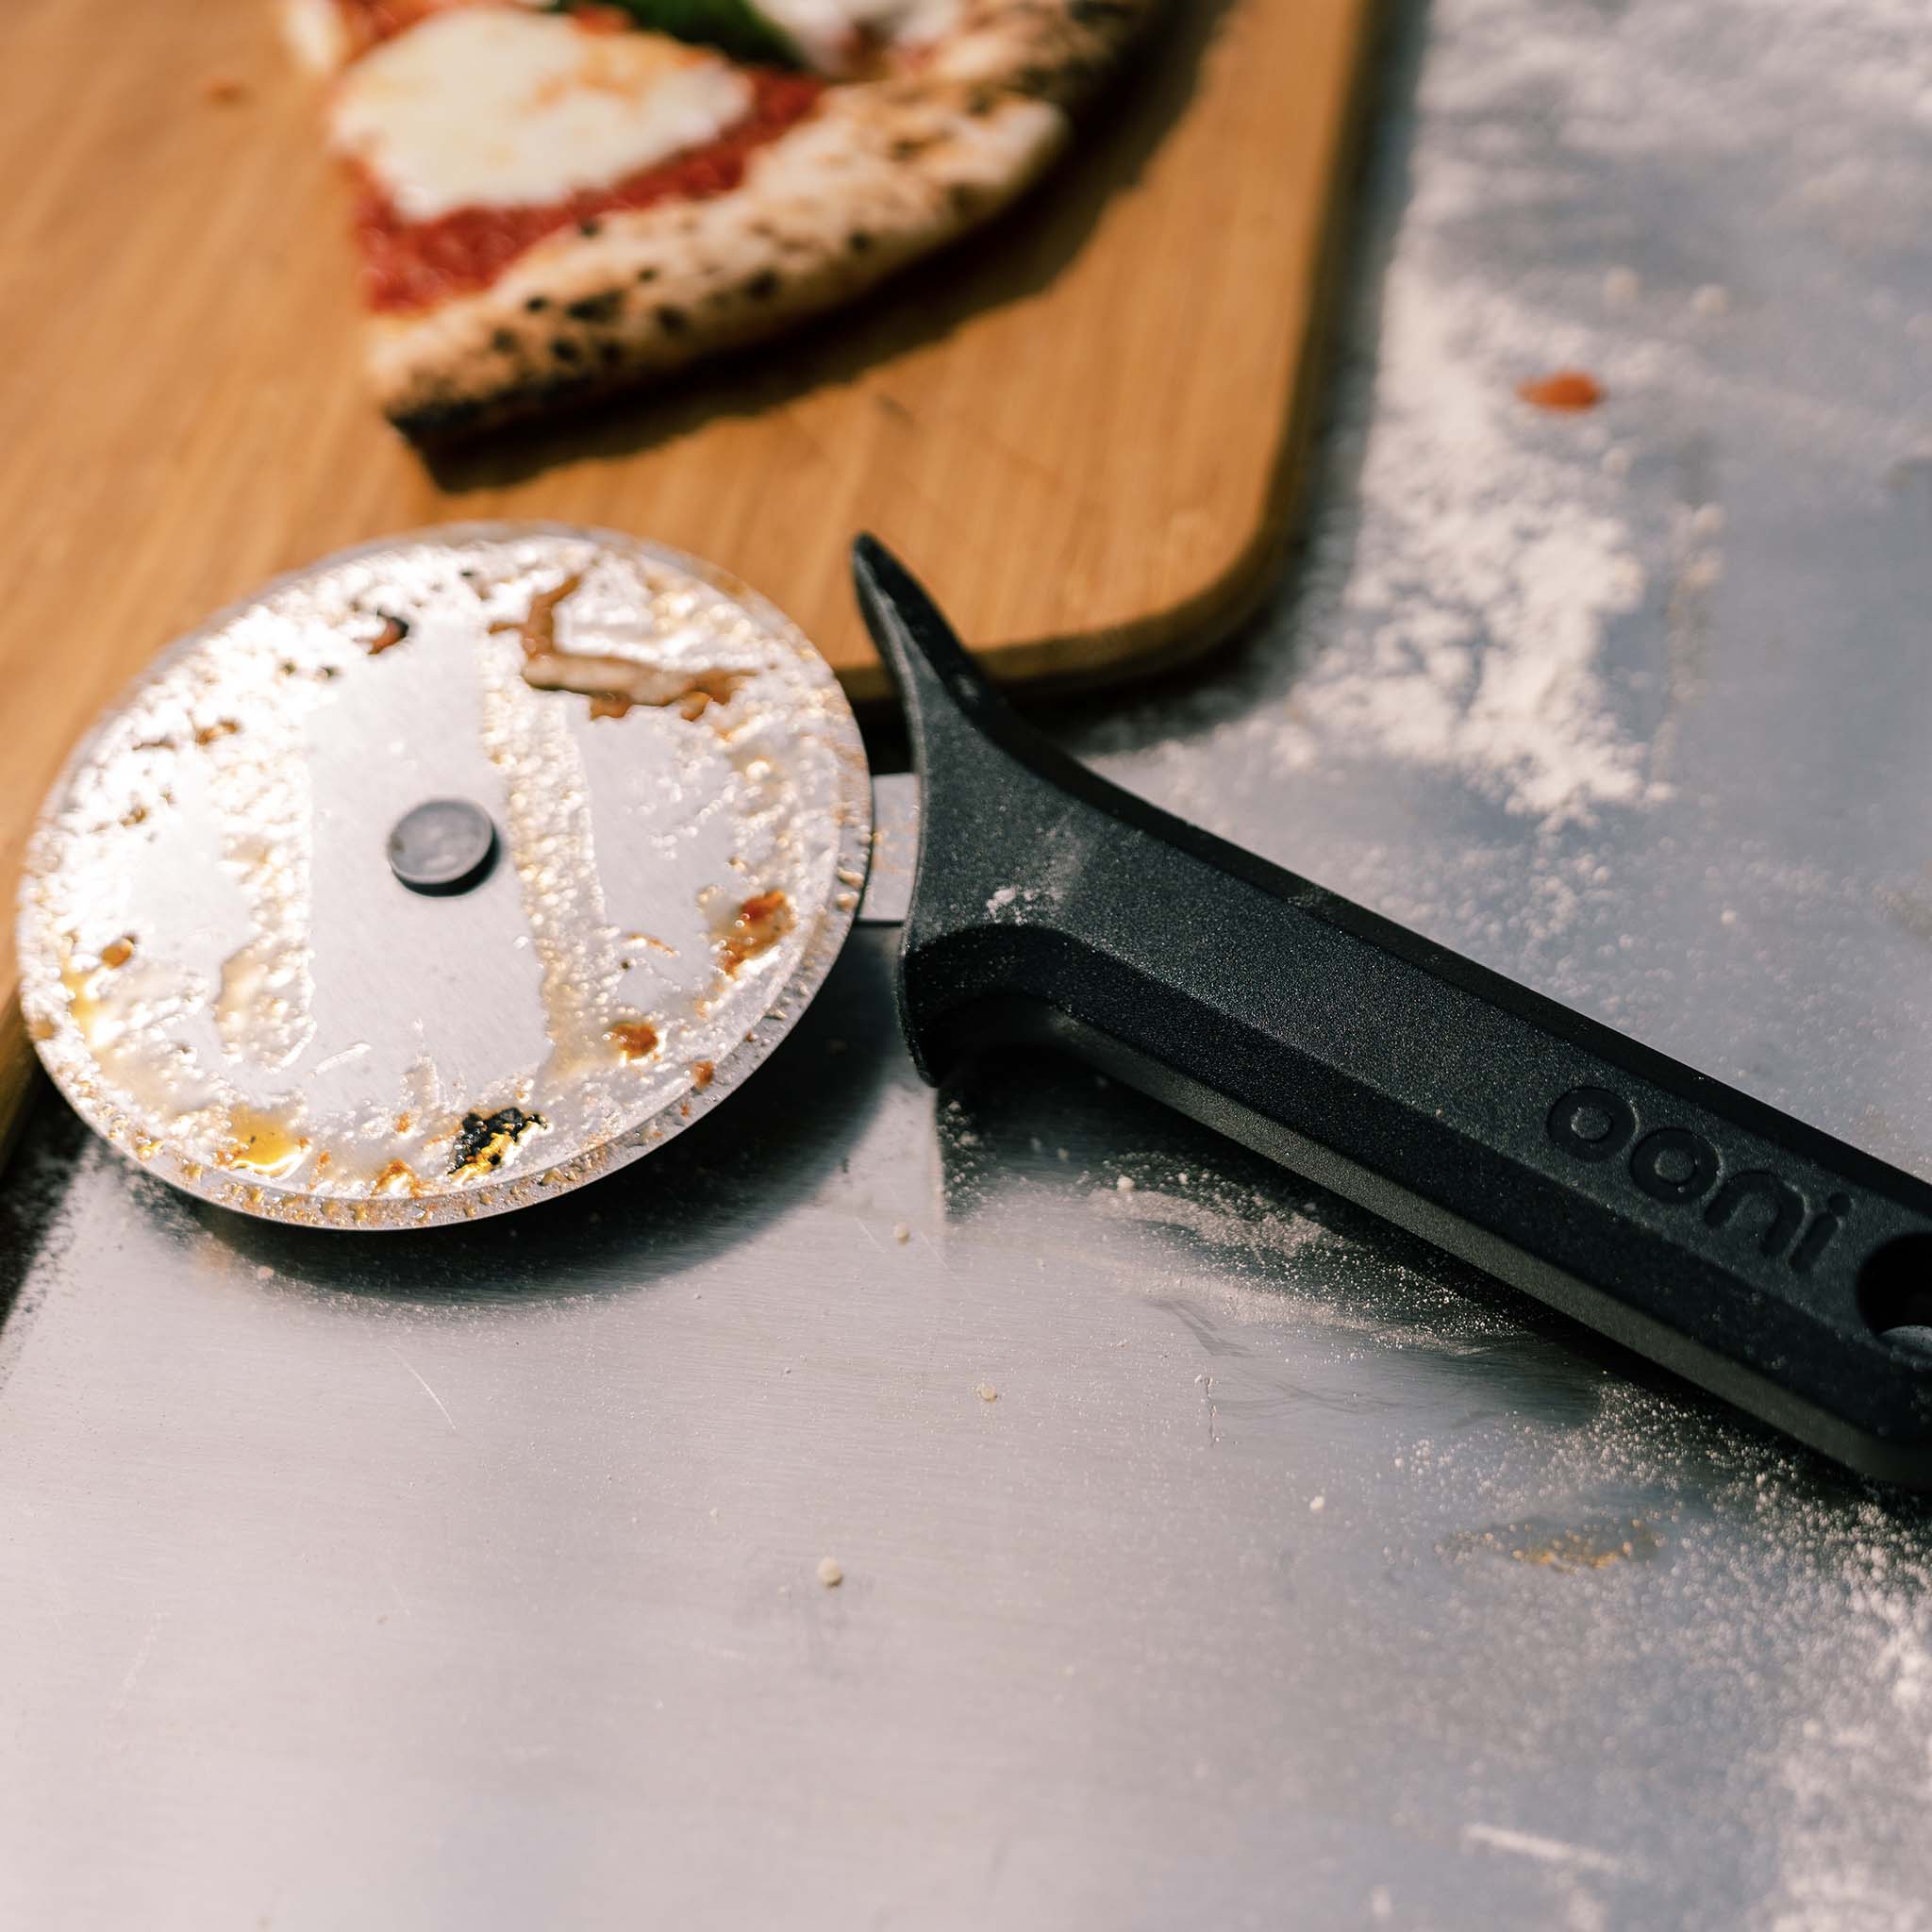 OONI Portable Oven Pizza Cutter Wheel